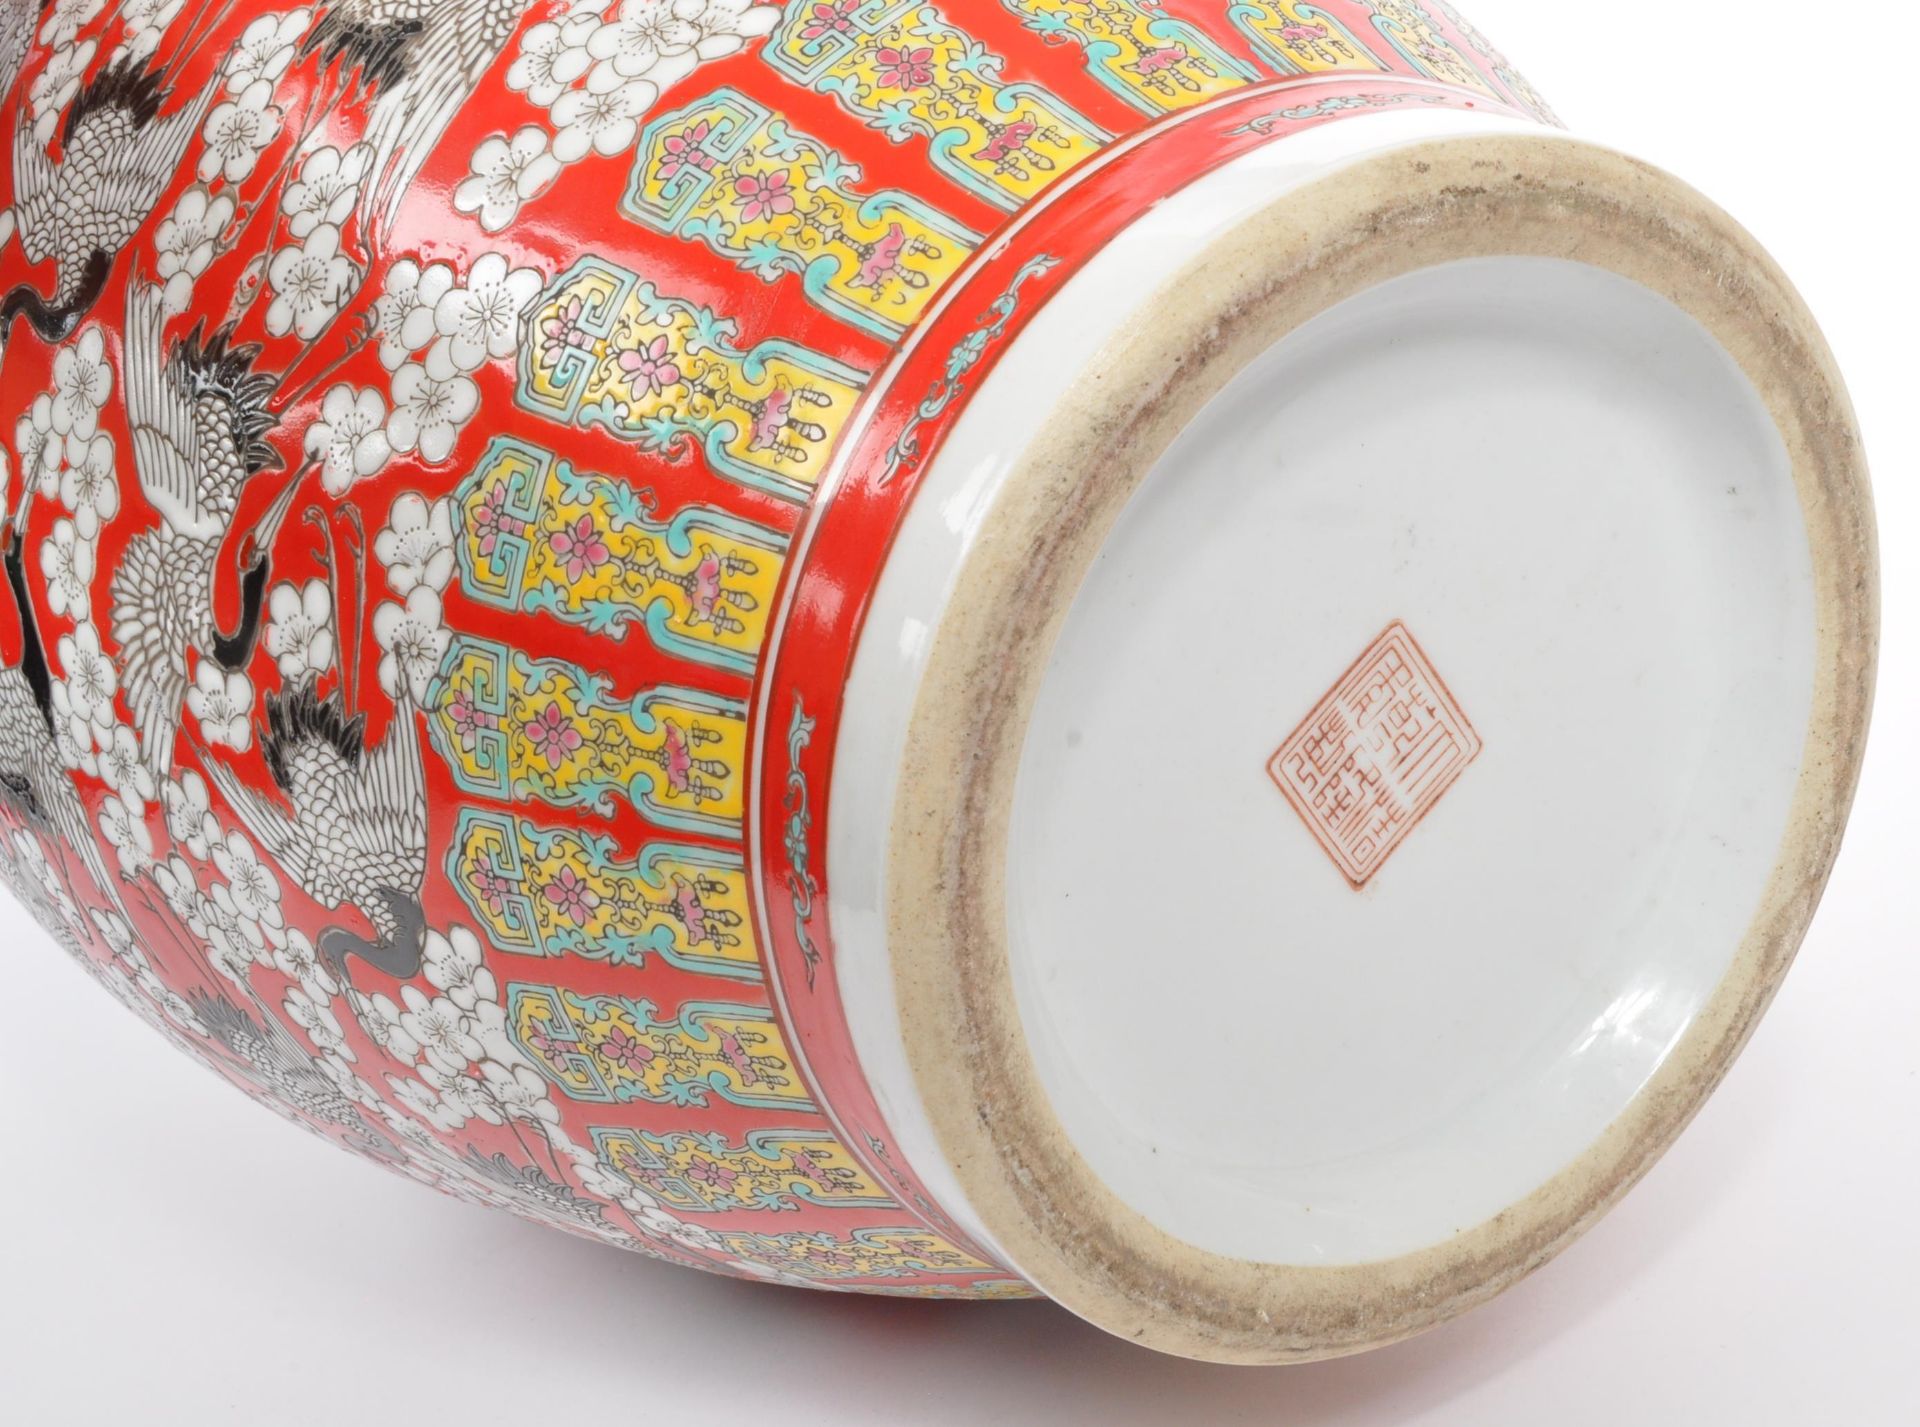 LARGE CHINESE VASE IN RED EMBELLISHED WITH CRANES & BLOSSOM - Image 6 of 6